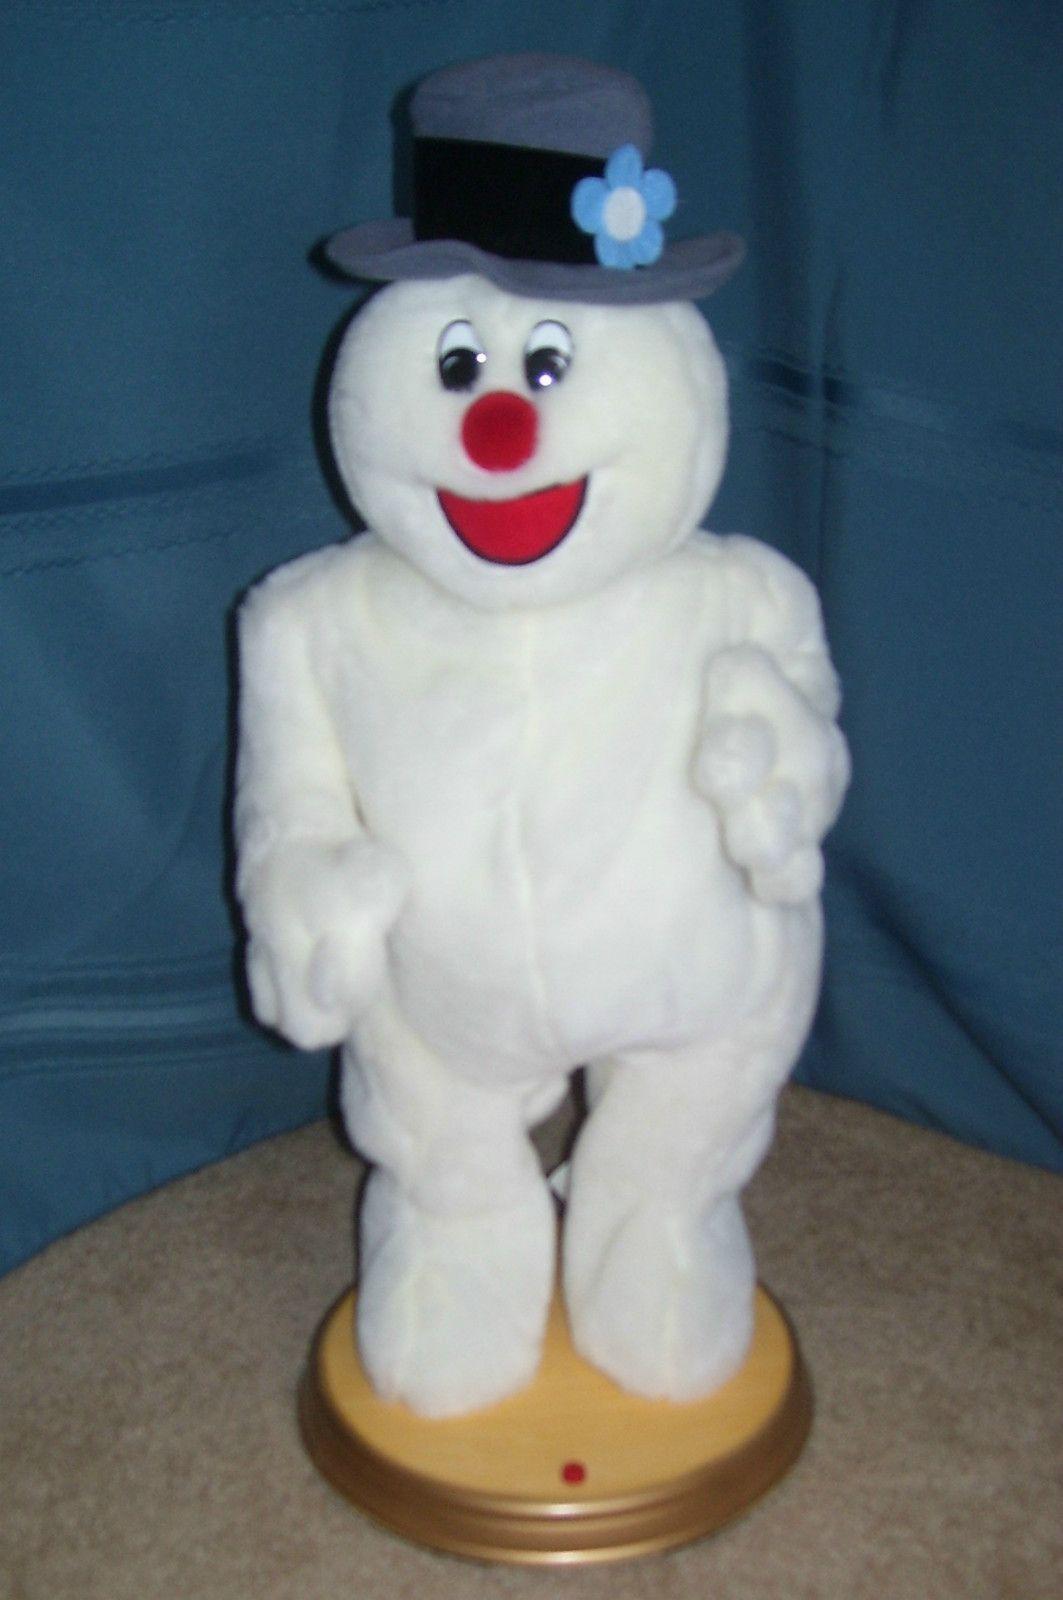 Camber reccomend Swinging singing snowman